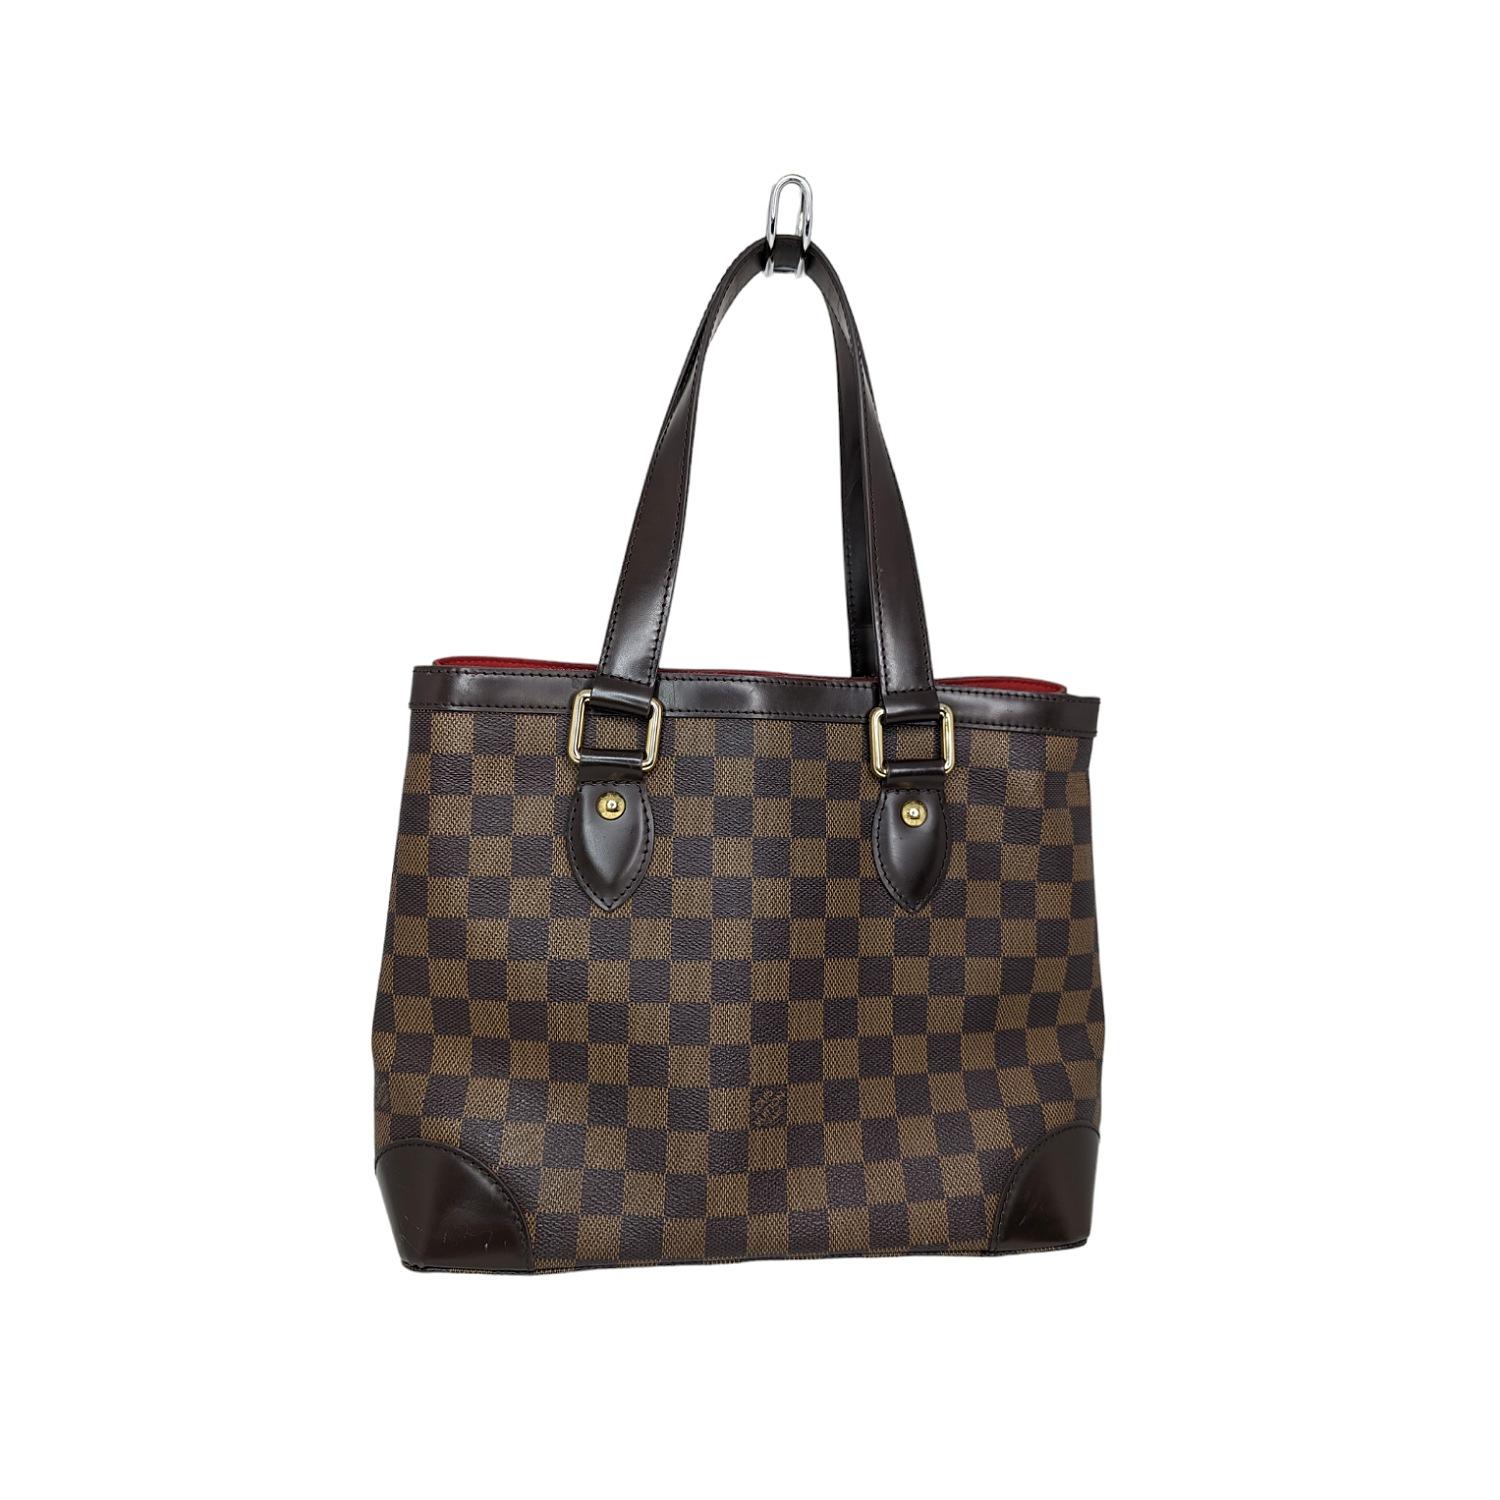 This Louis Vuitton Damier Canvas Hampstead Bag is a spacious classic tote made in Damier Ebene print, which pairs classic canvas with a smooth leather accent. With its expandable sides and roomy capacity, it will hold all your daily essentials in